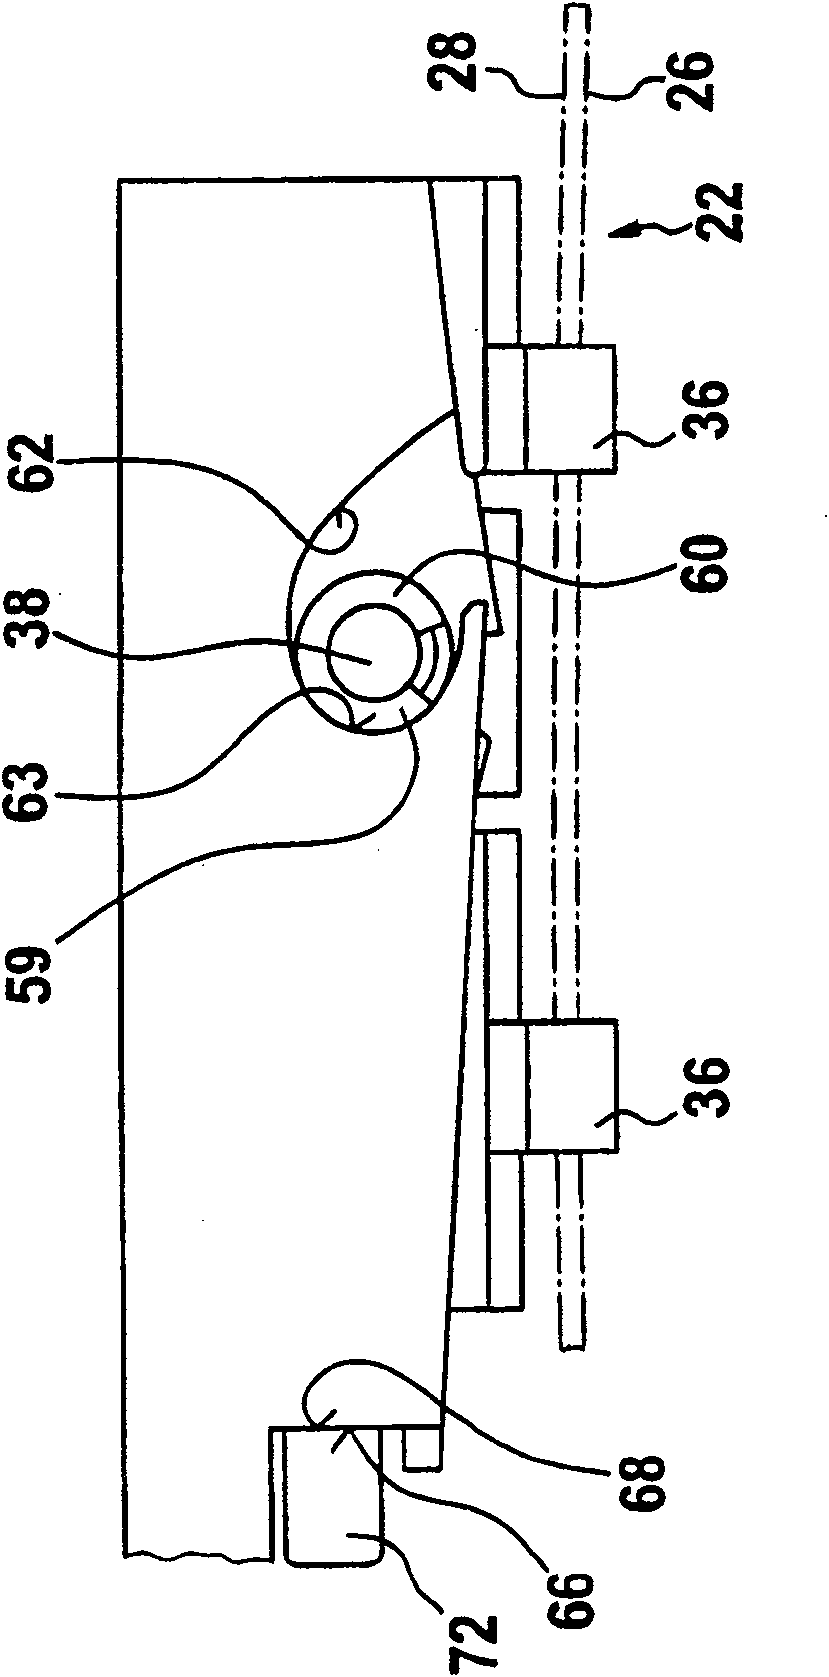 Wiper lever comprising a wiper arm and a wiper blade which is connected to the same in an articulated manner